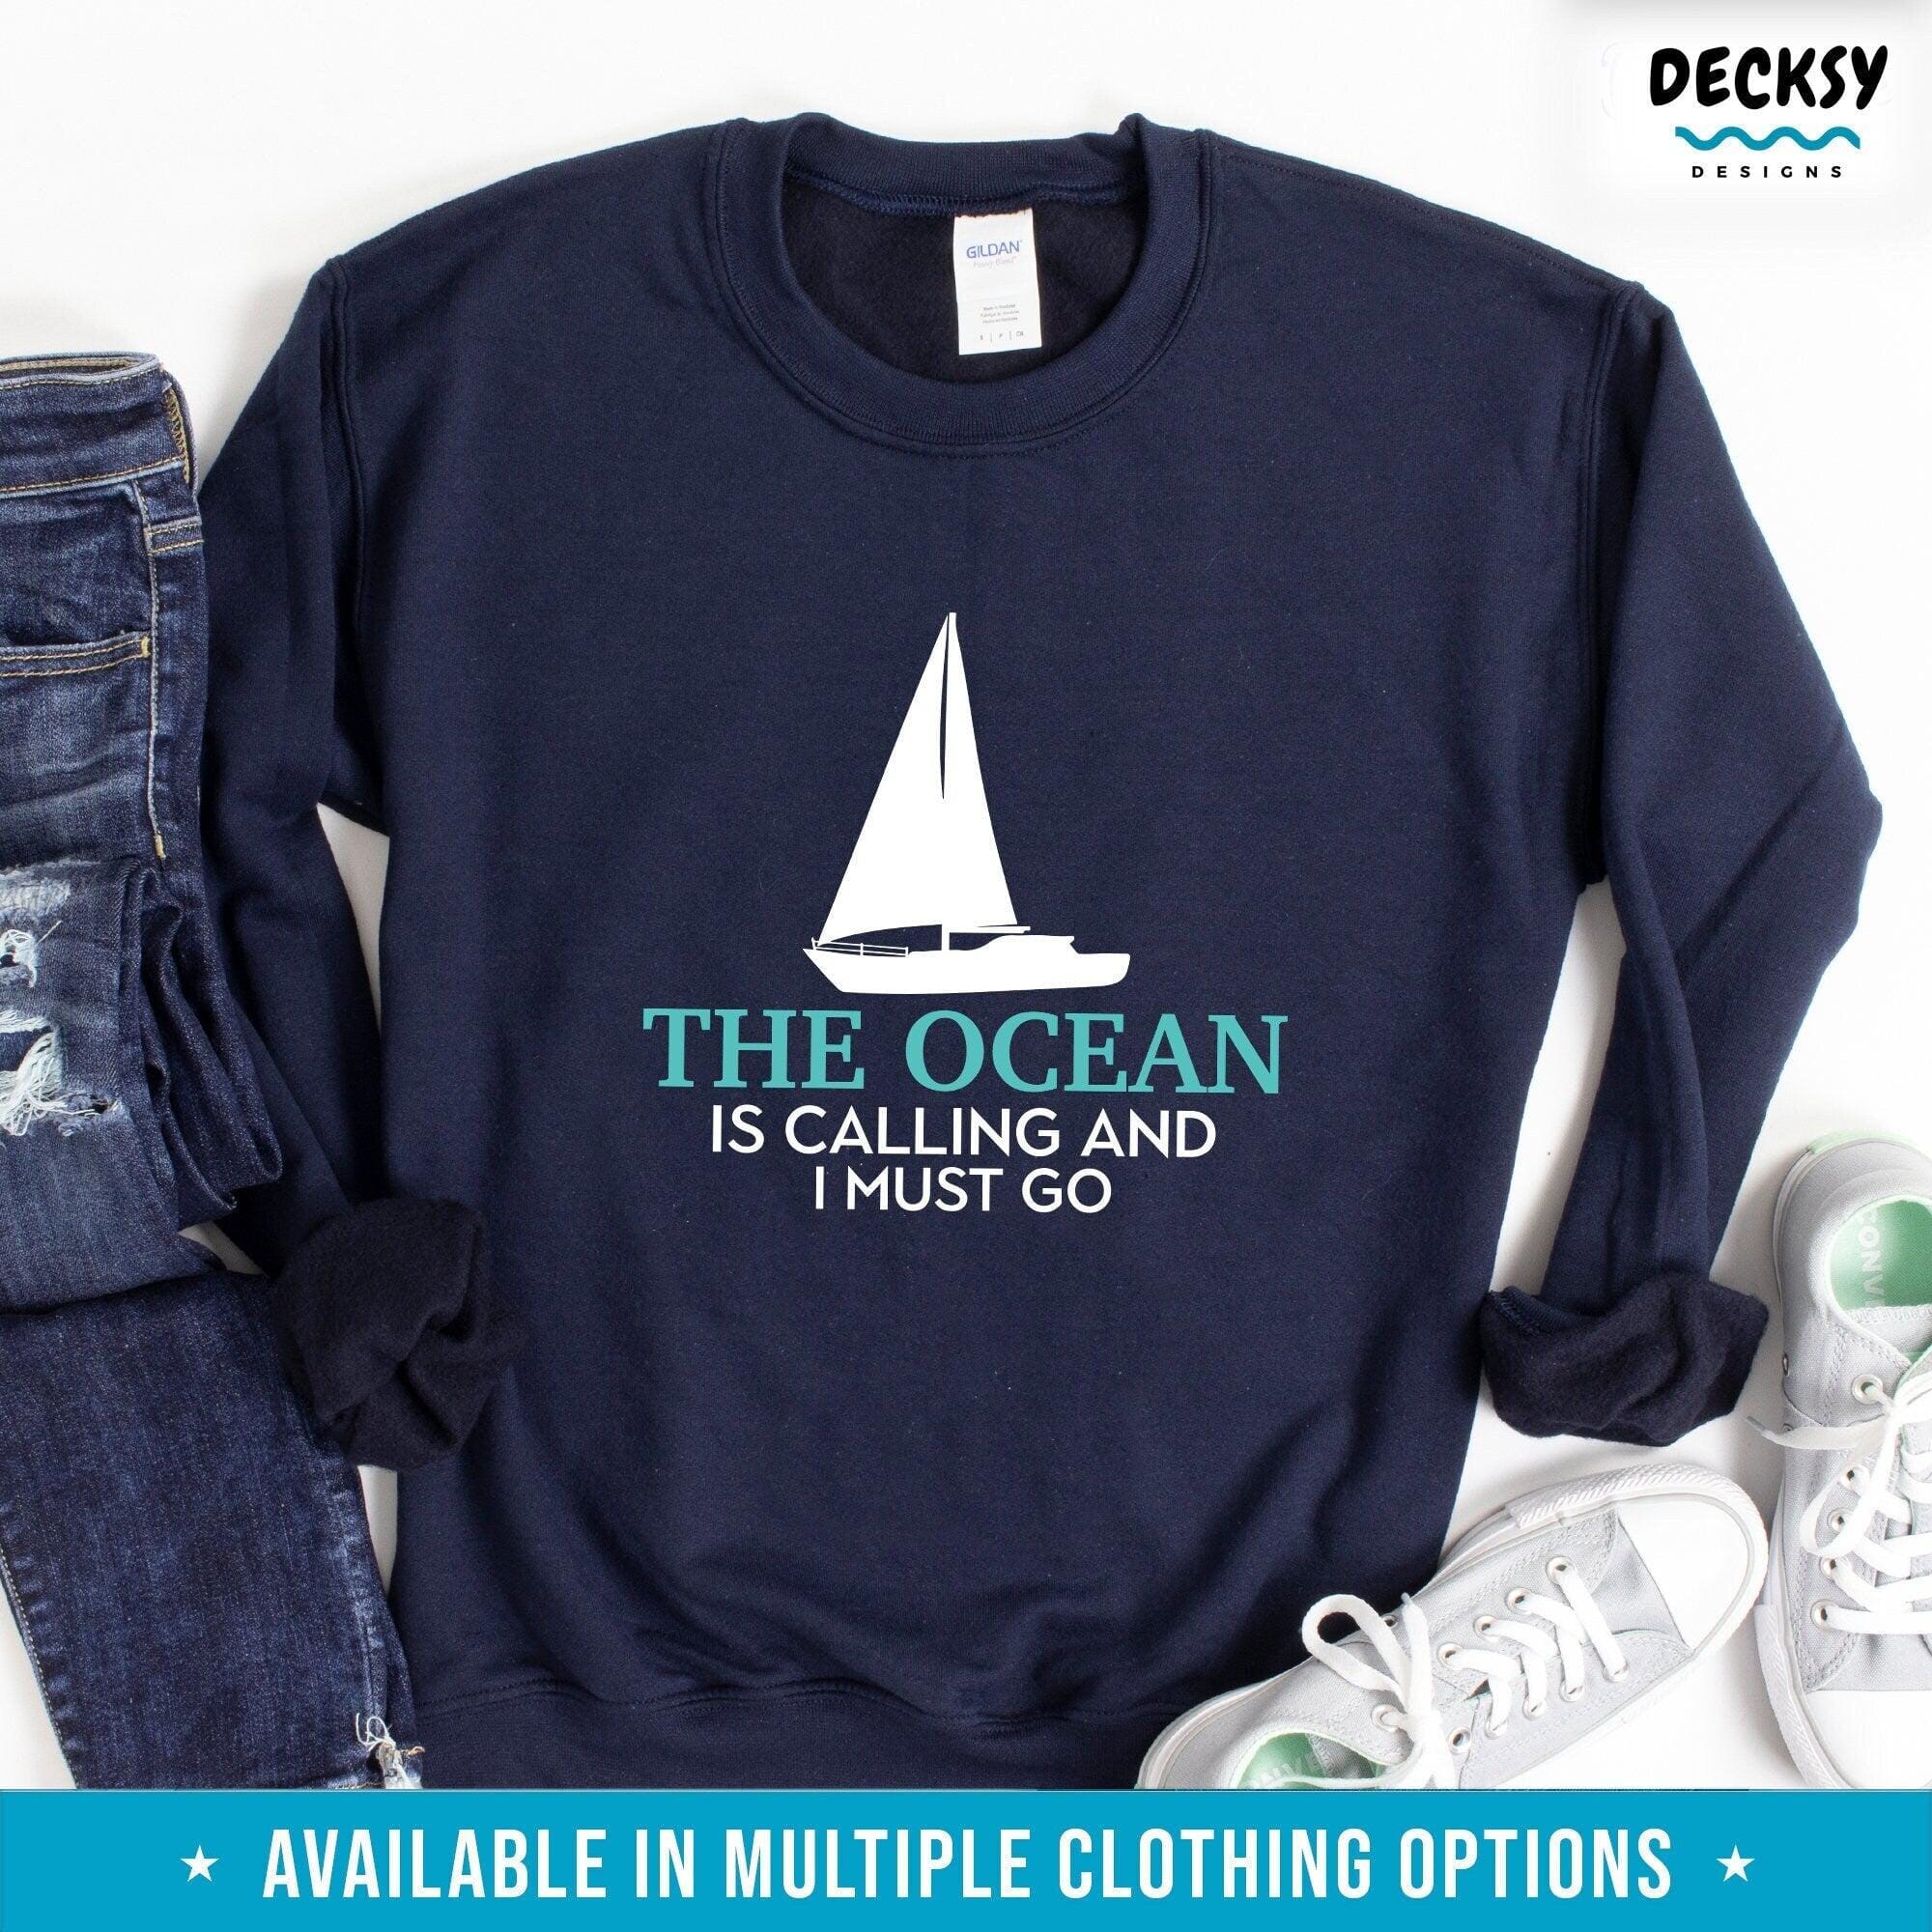 Sailing Shirt, Ocean Gift-Clothing:Gender-Neutral Adult Clothing:Tops & Tees:T-shirts:Graphic Tees-DecksyDesigns